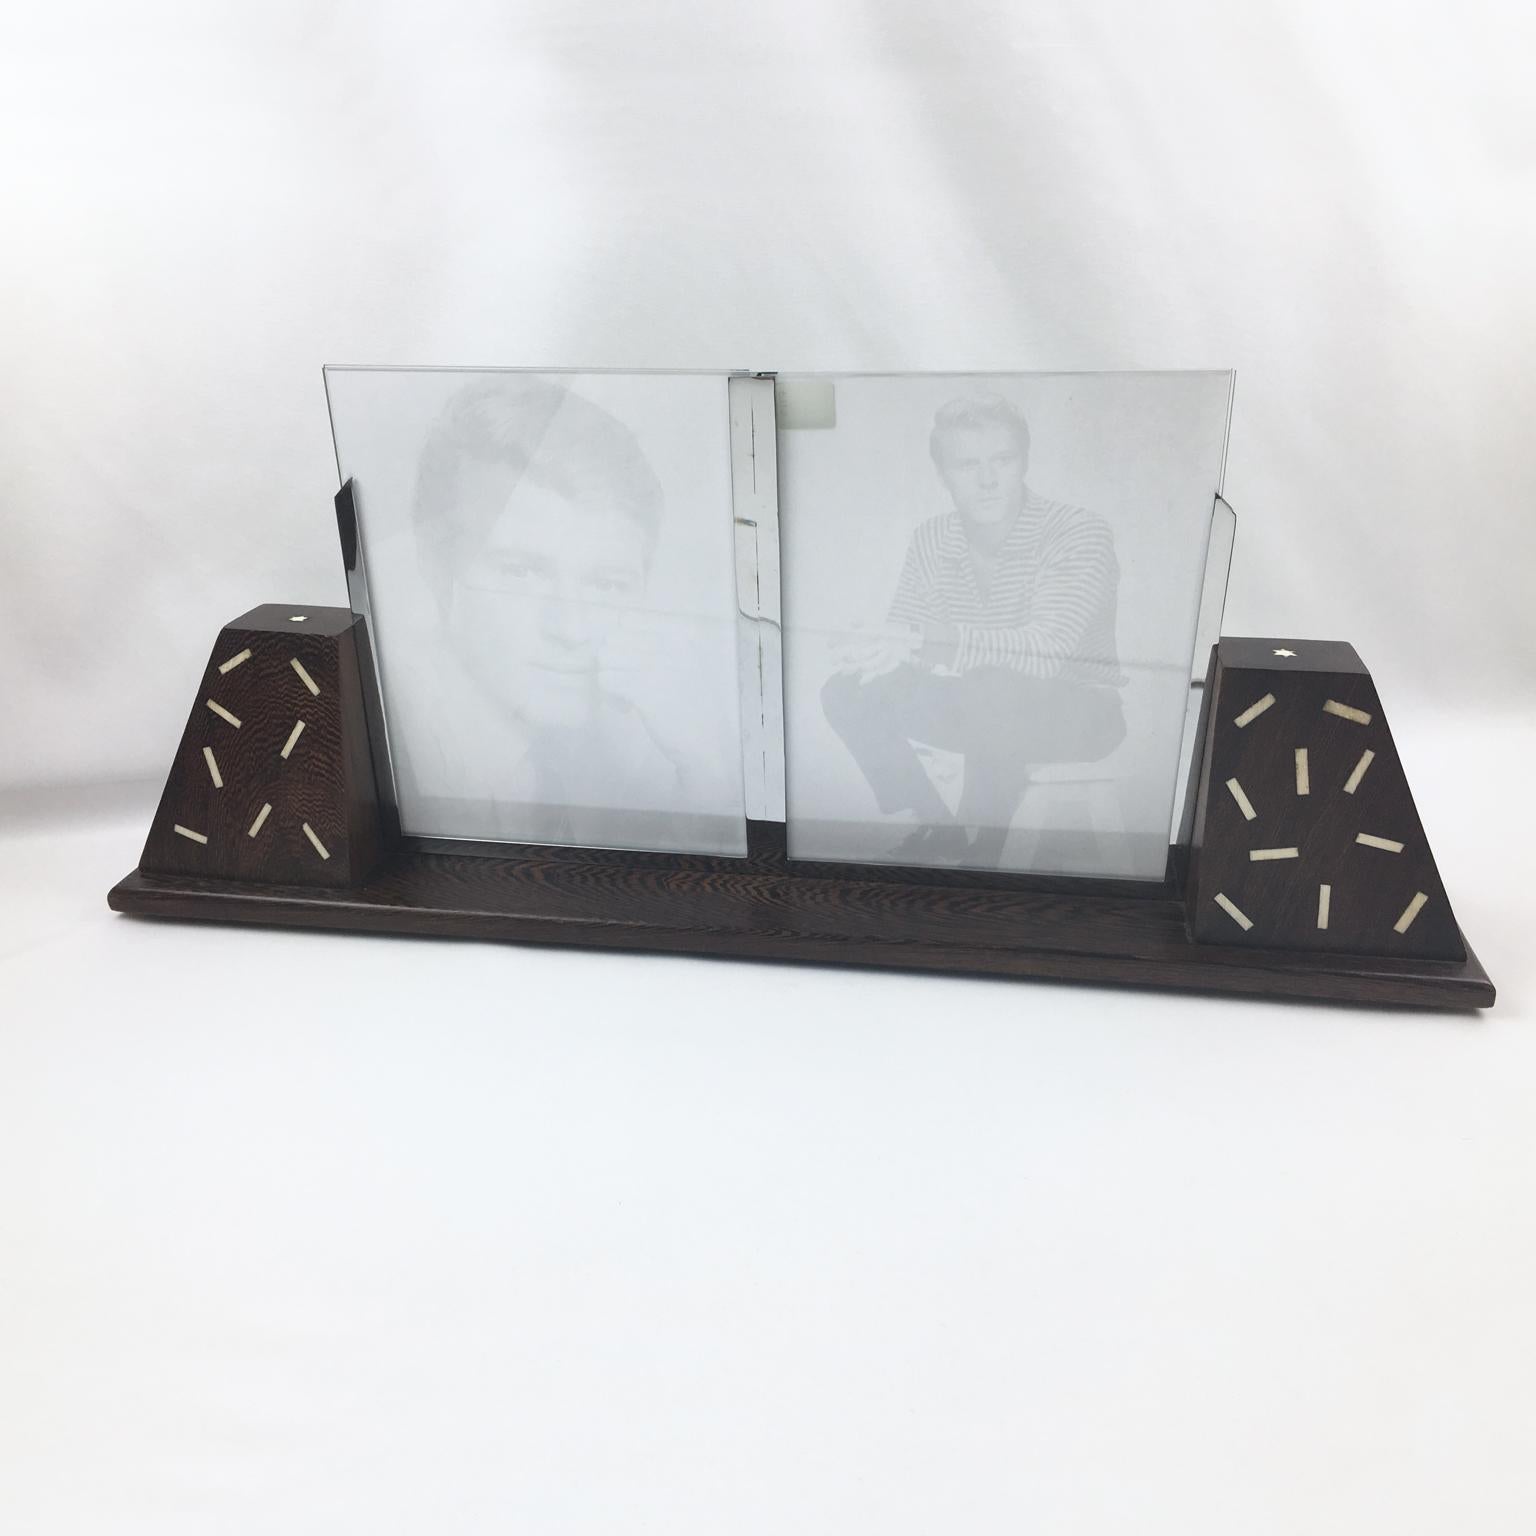 Metal Art Deco Wood and Chrome Double View Picture Frame, France 1930s For Sale